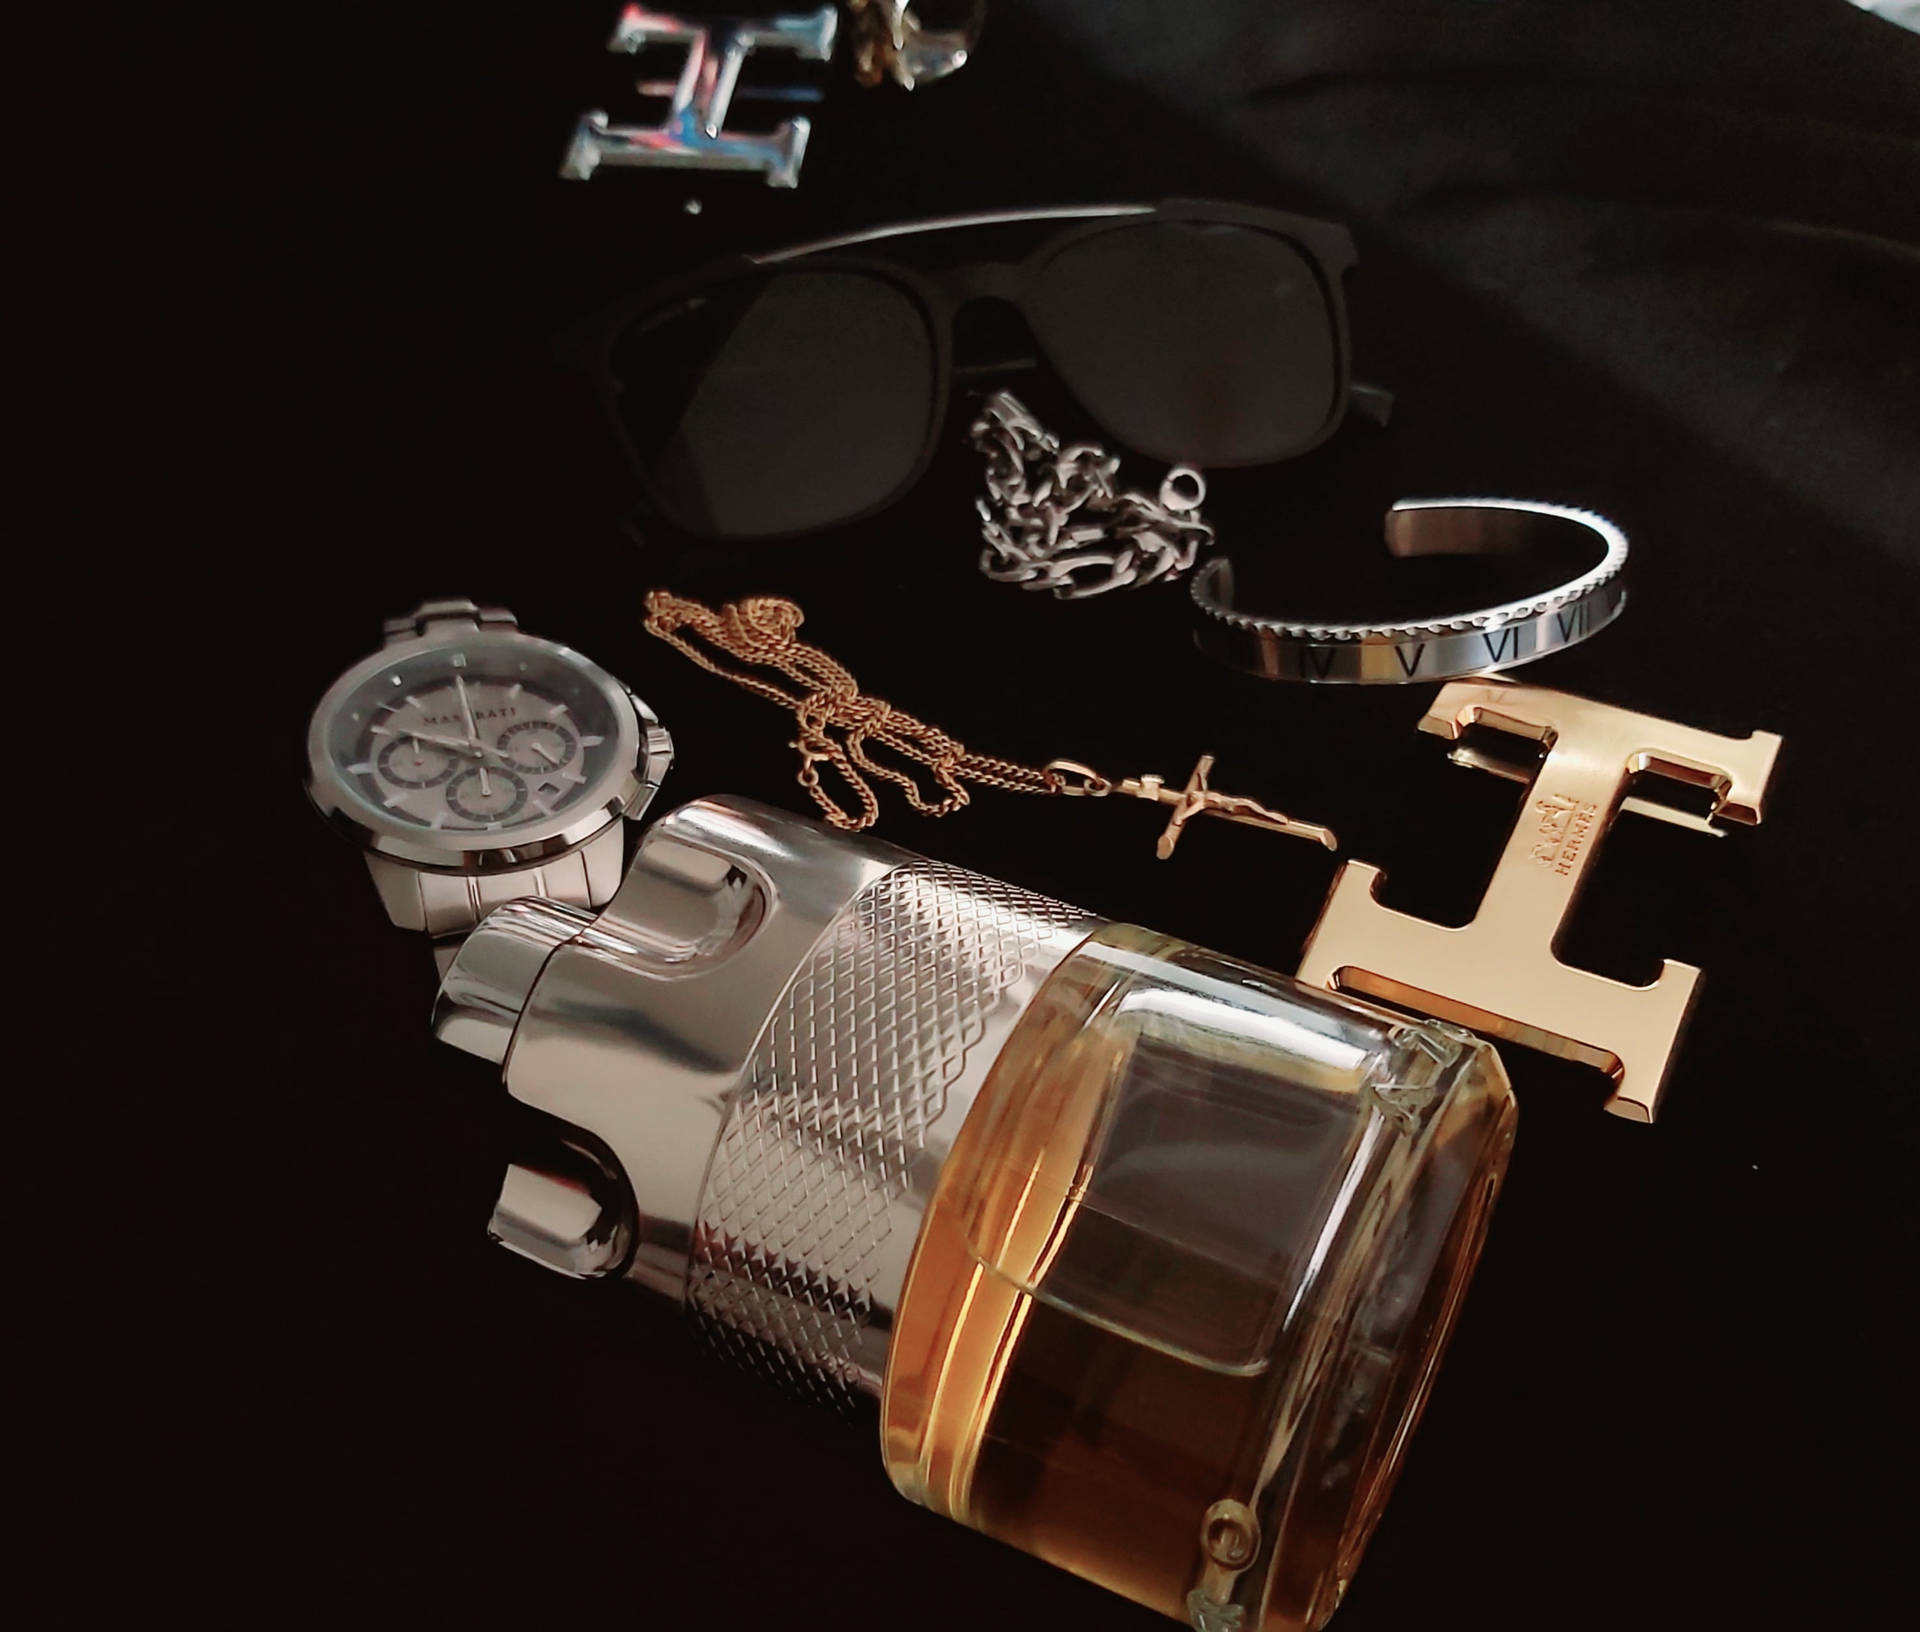 Hermes Accessories And Perfume